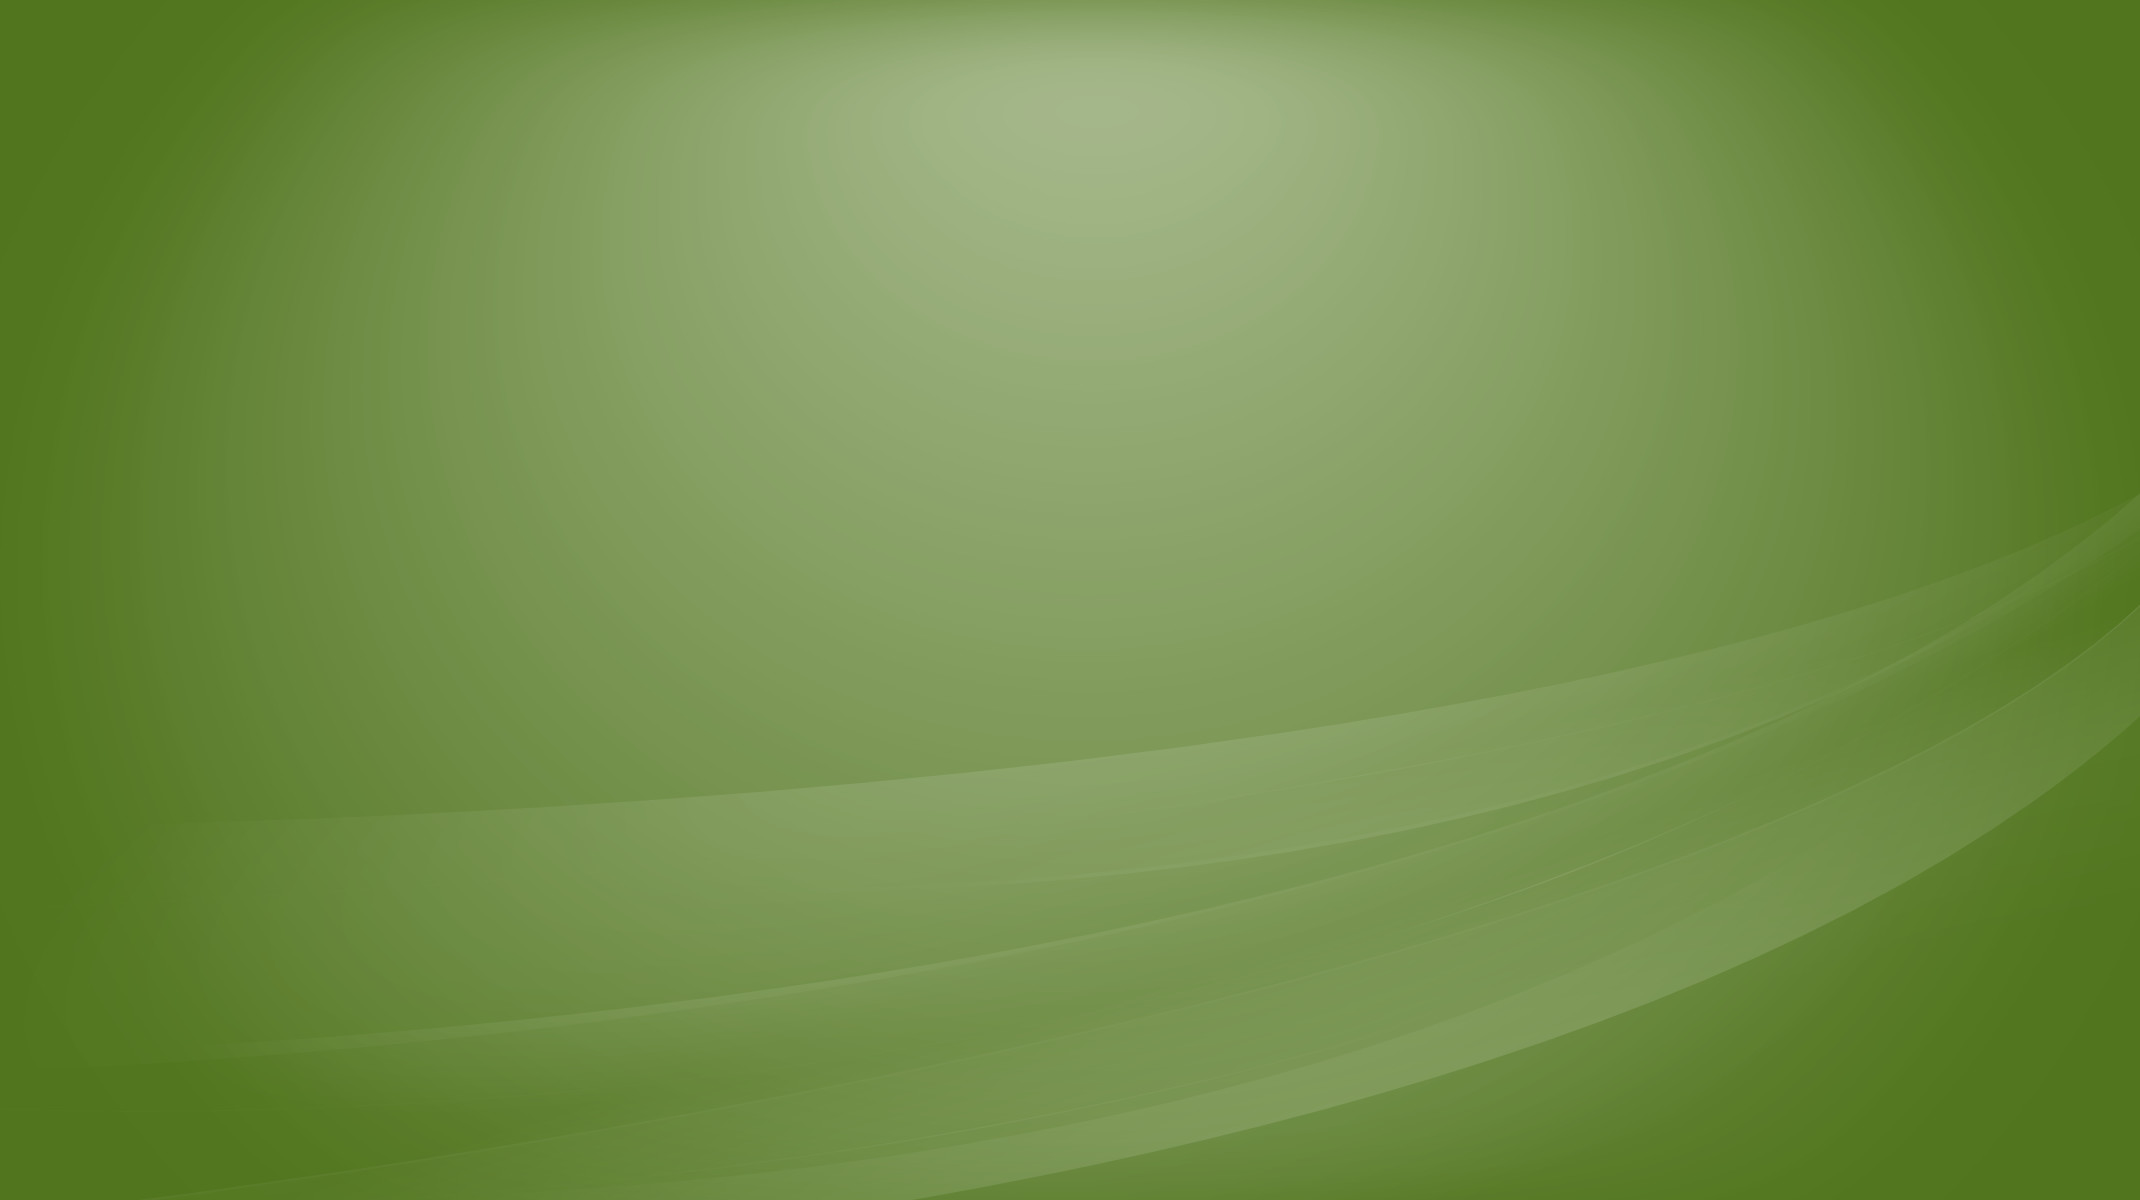 2140x1200 Linux Mint wallpapers (Lisa Edition) | HD Wallpapers